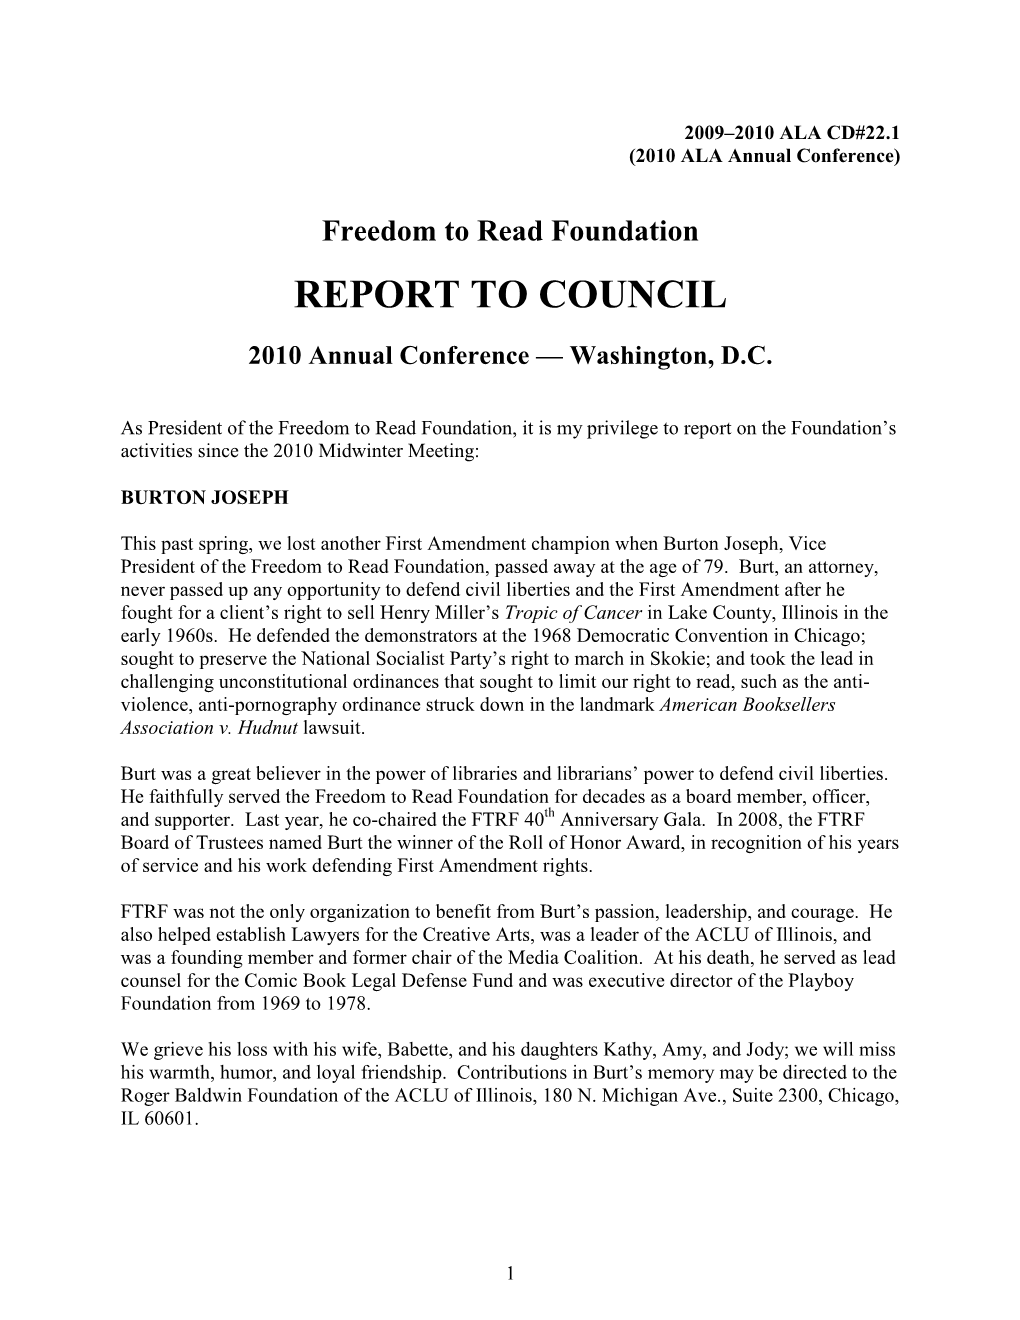 Report to Council